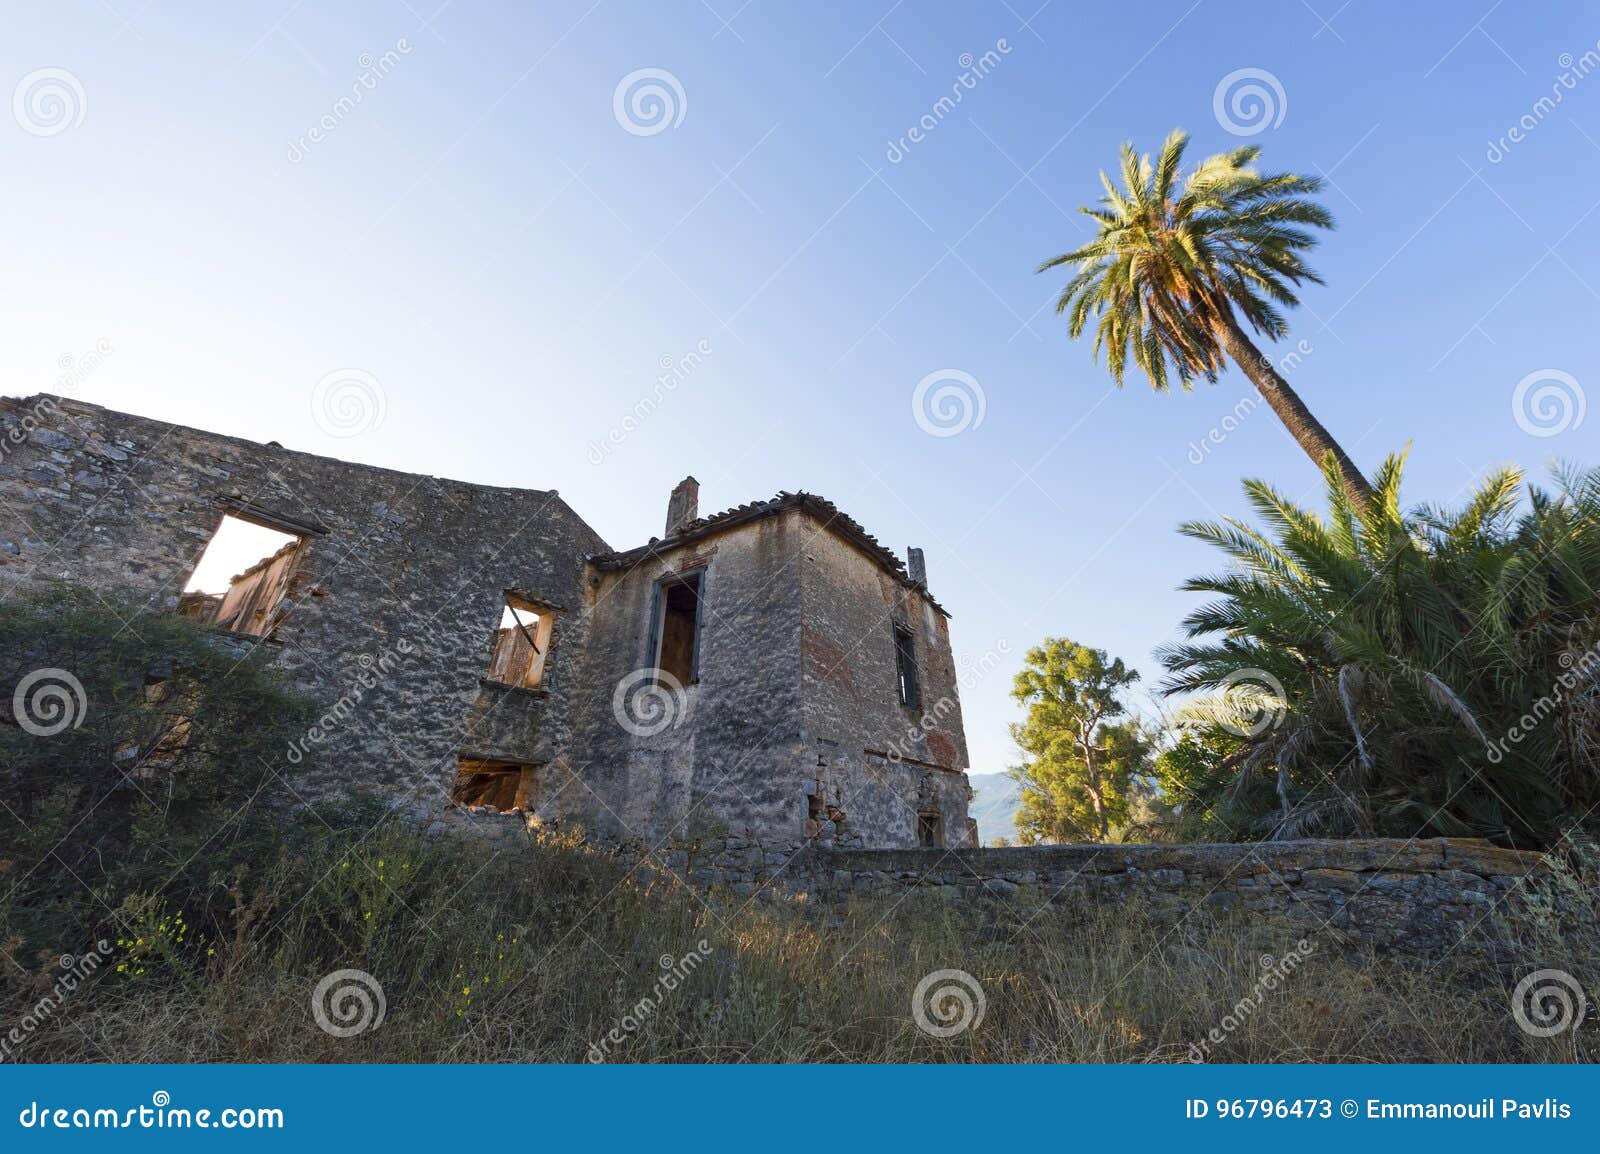 Abandoned villa in Greece stock image. Image of crack - 96796473